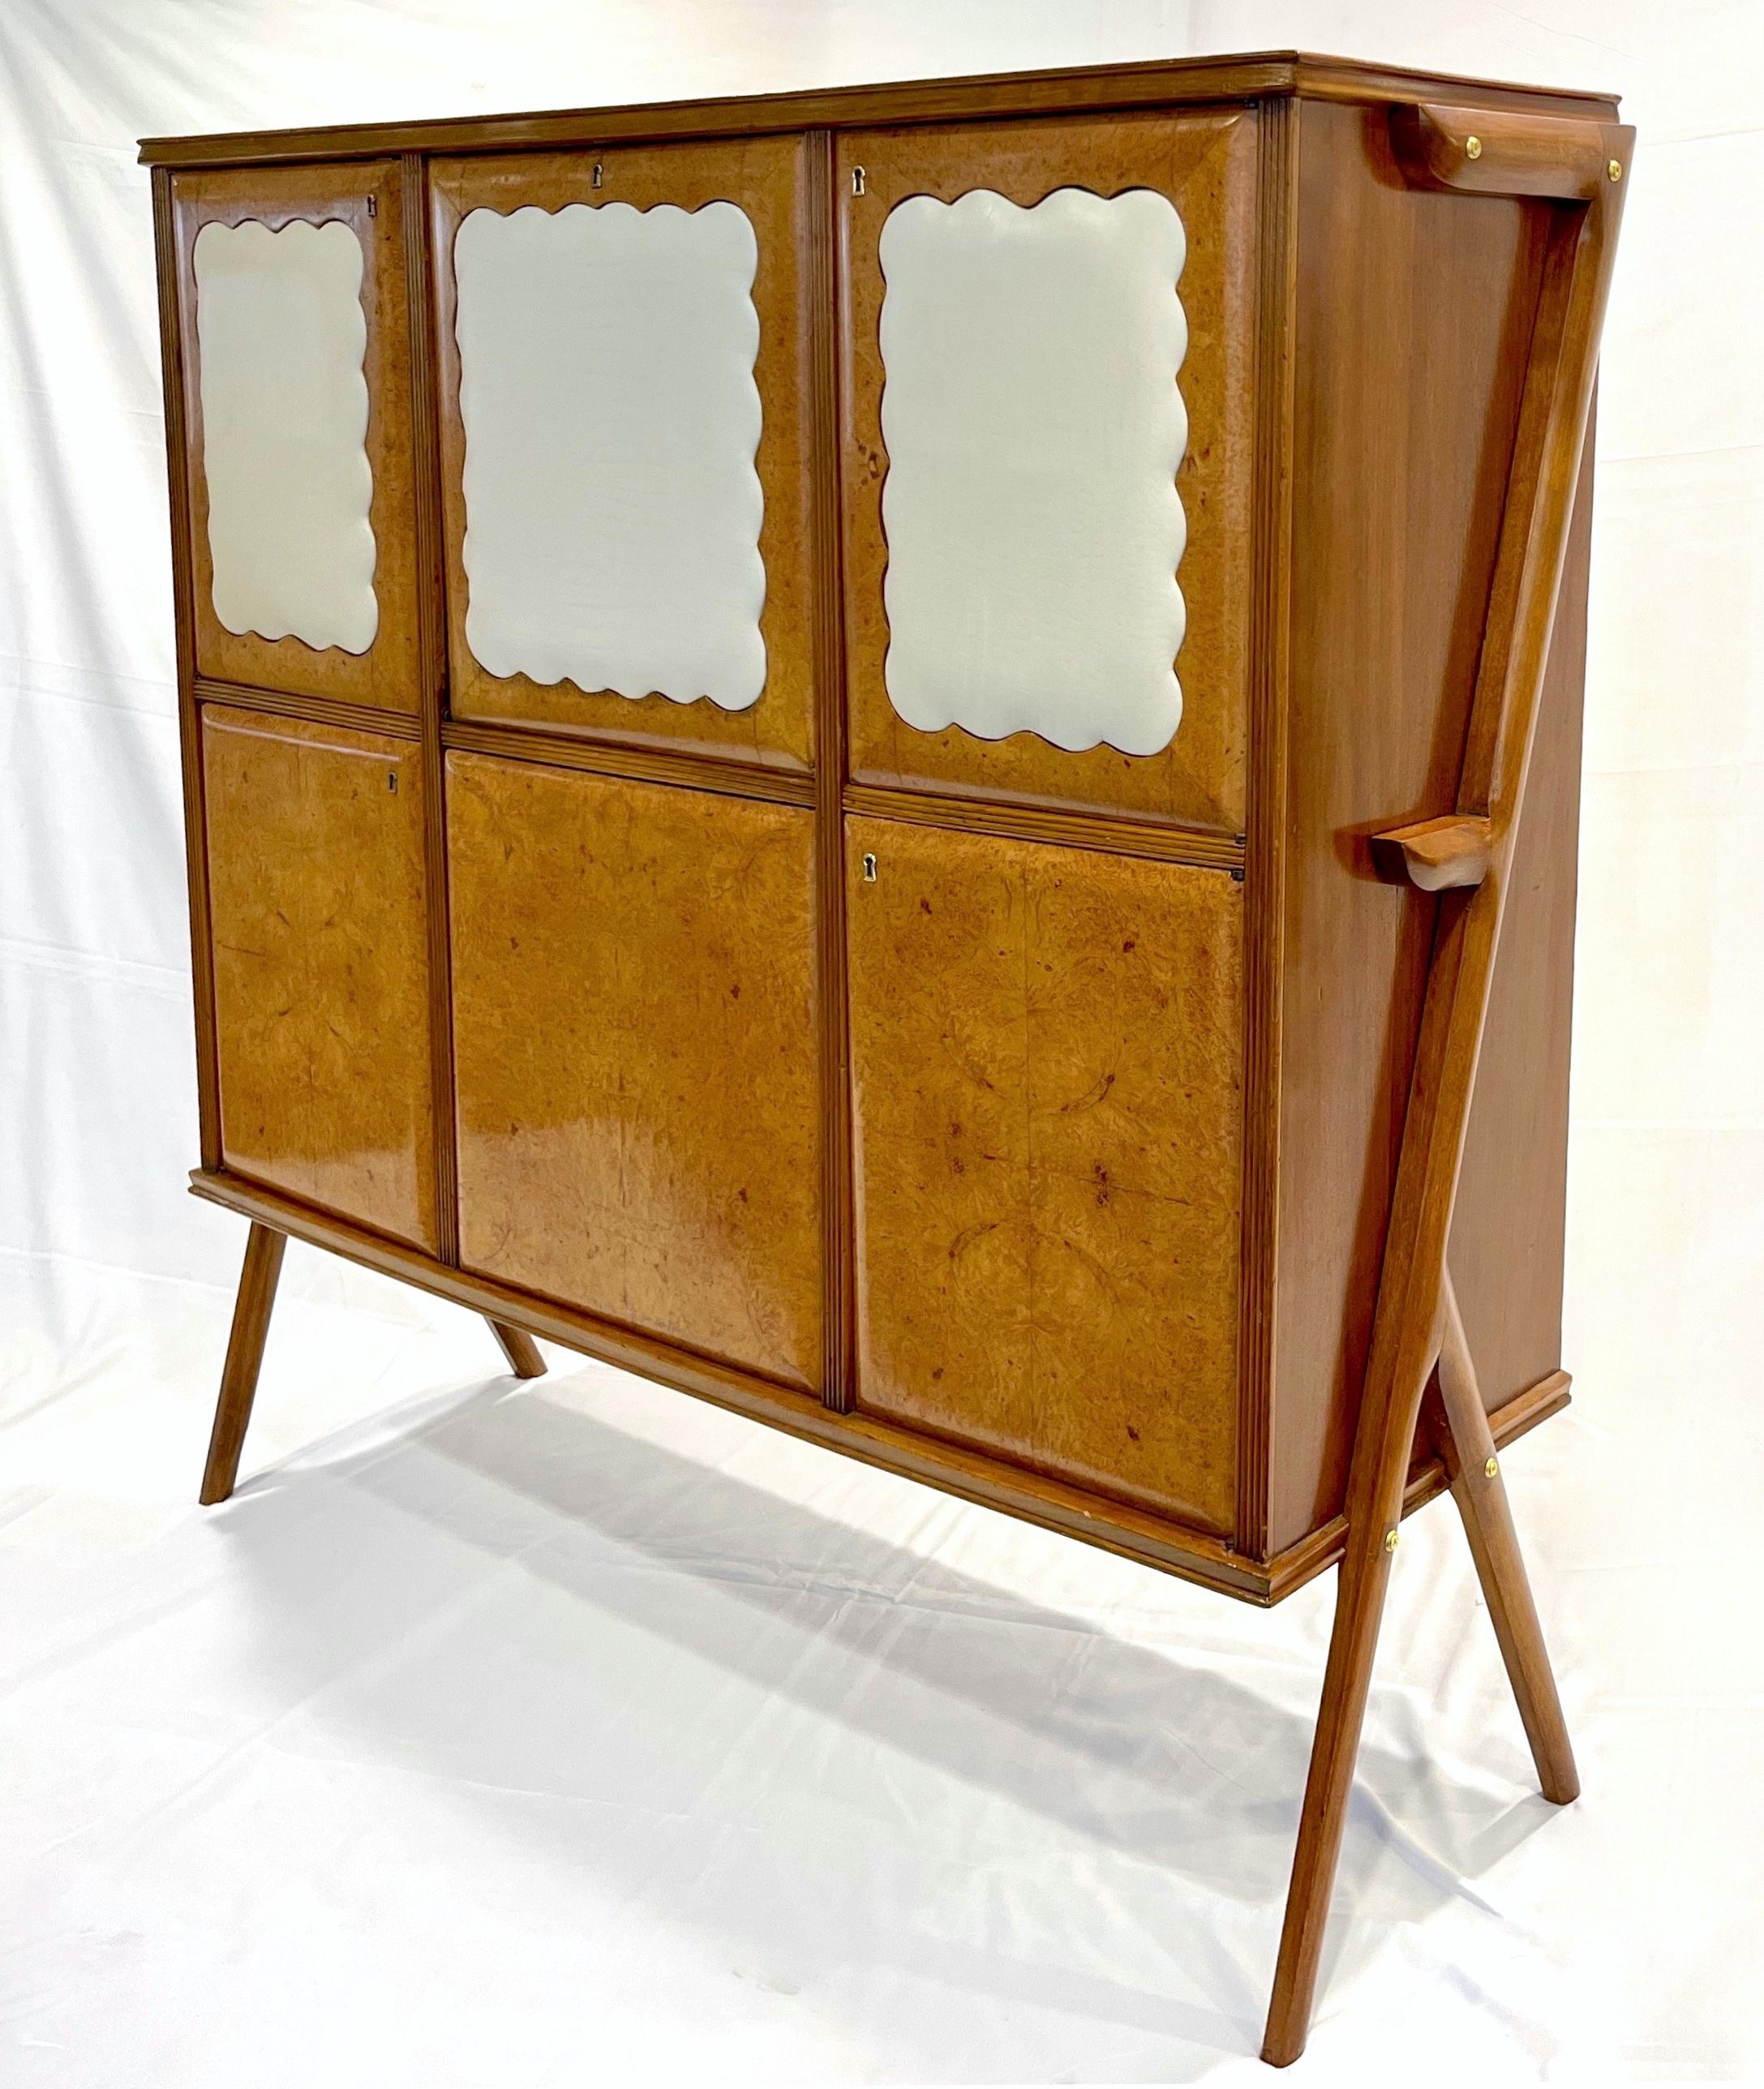 1950s Vintage Italian Maple Burl Wood Cabinet Bar with Cream Leather Panels For Sale 1